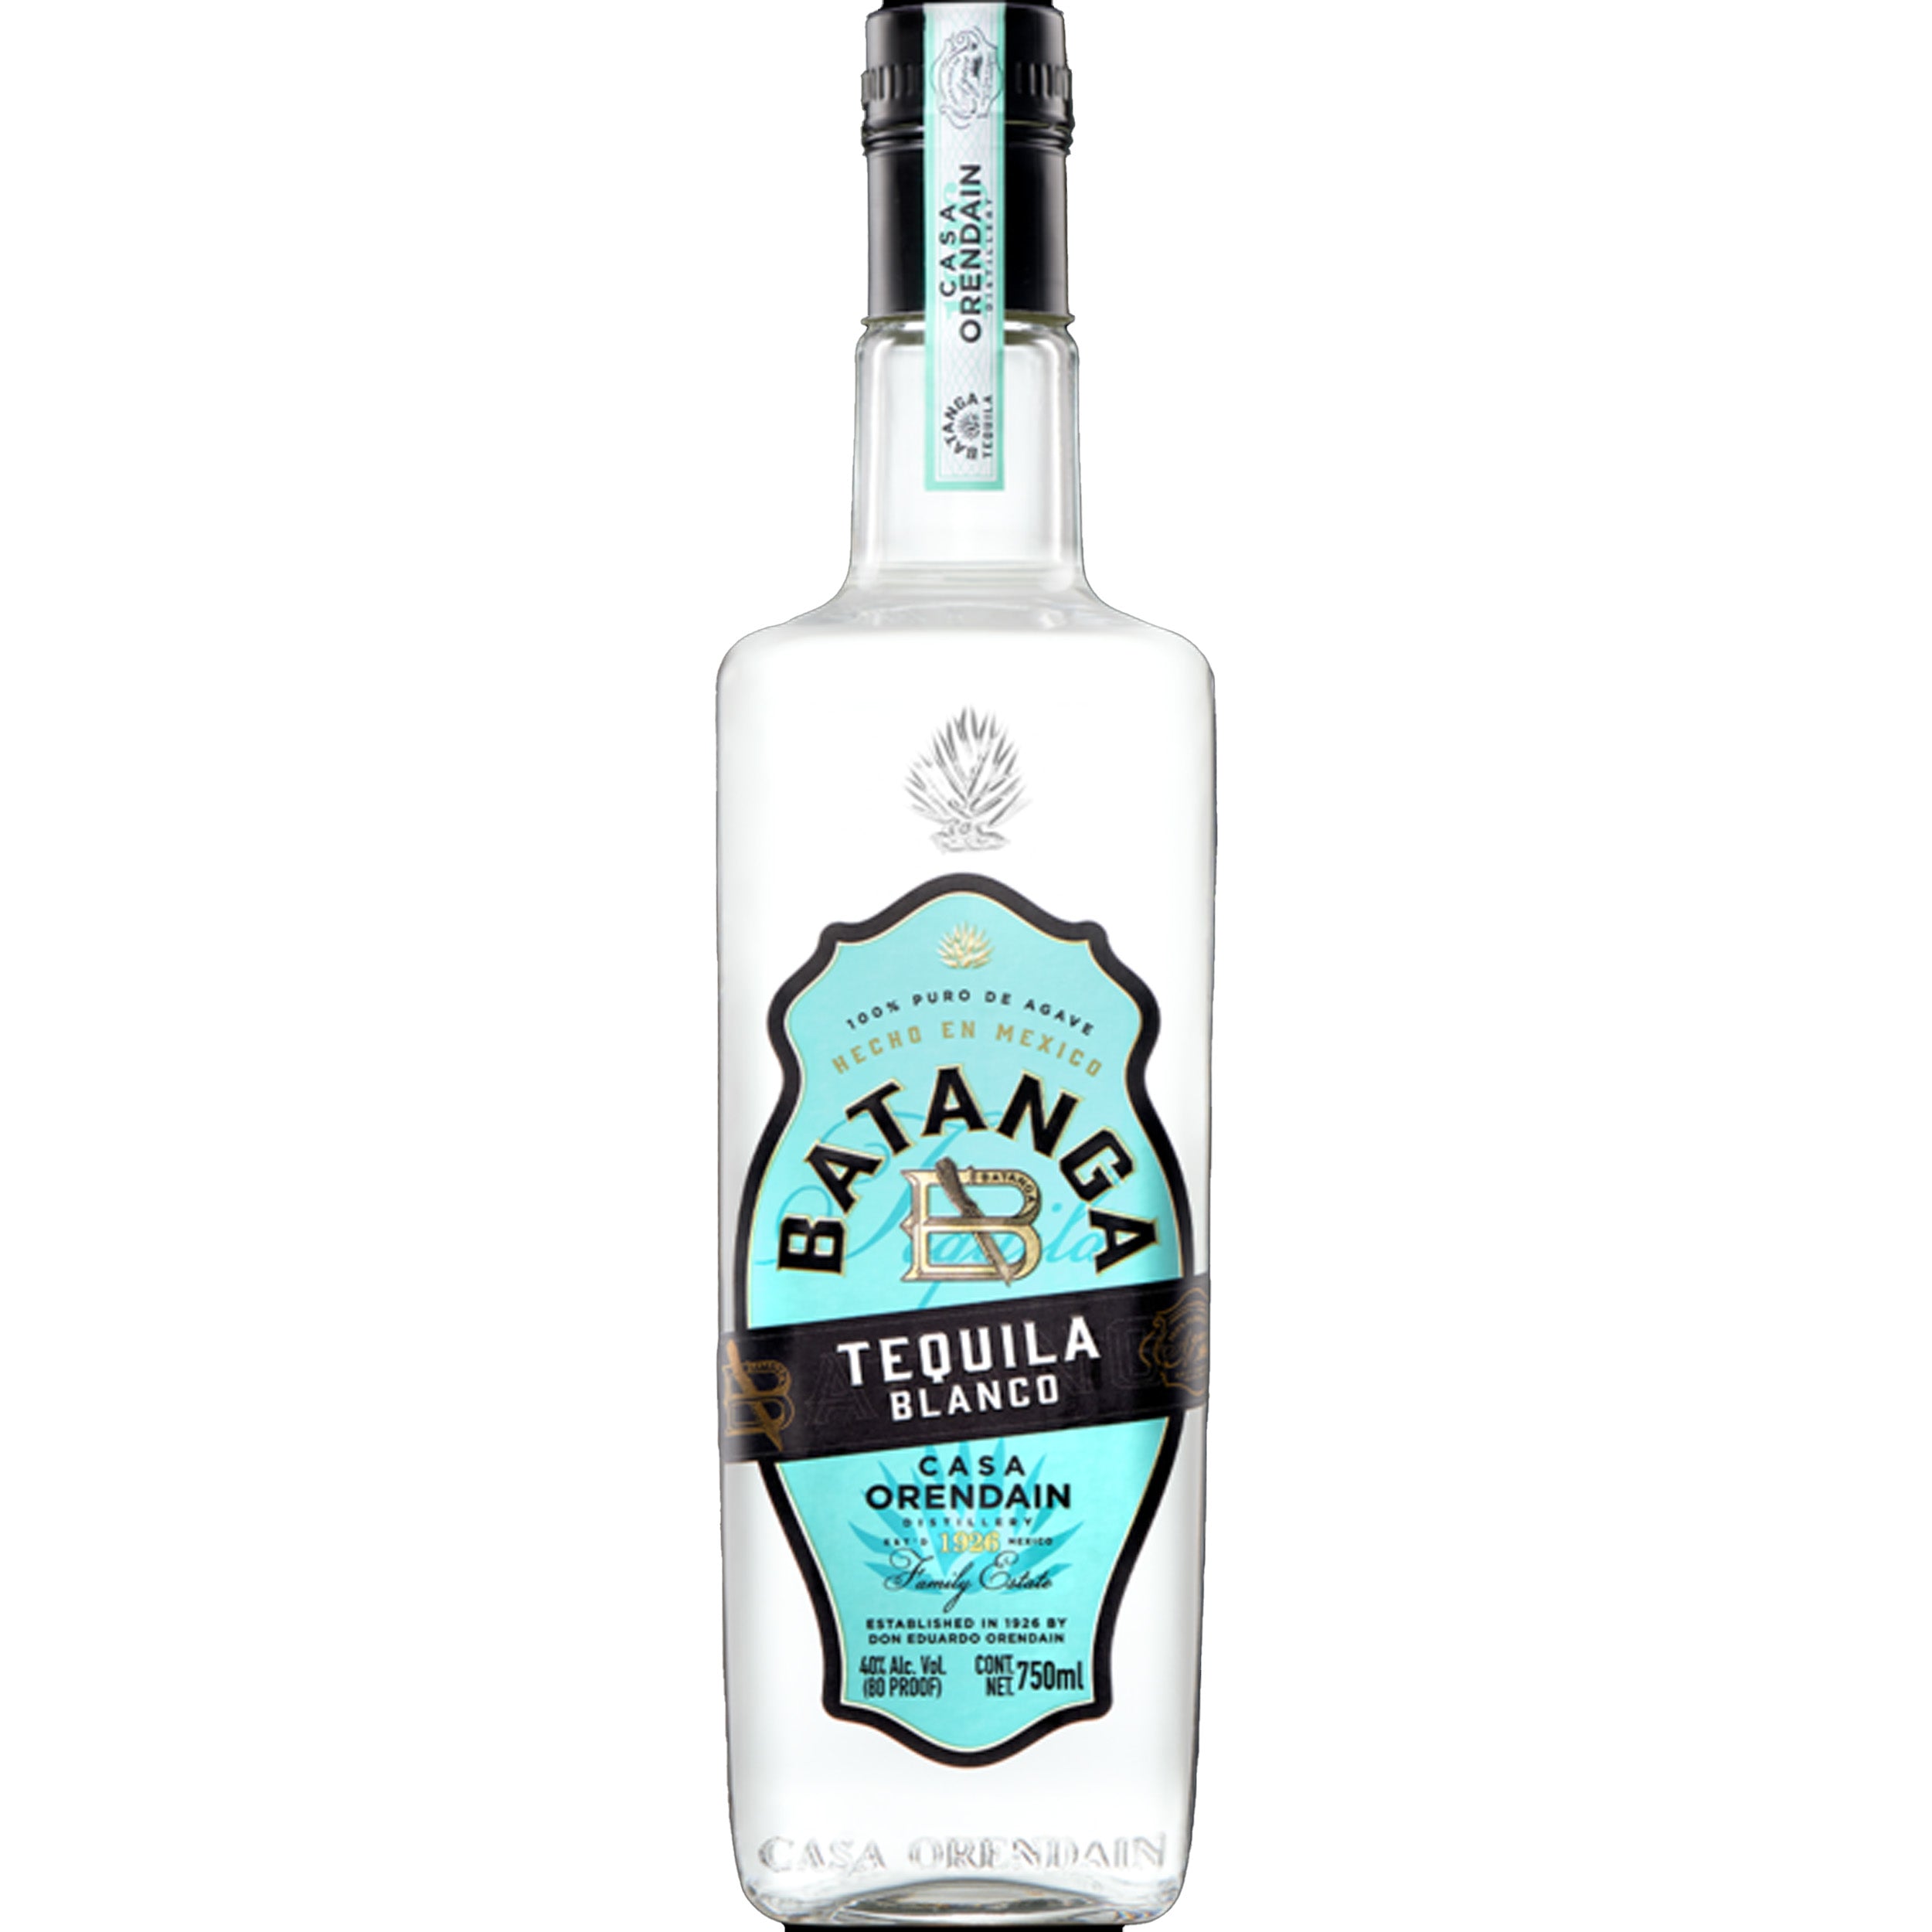 Casamigos Blanco Tequila 375ml - Old Town Tequila